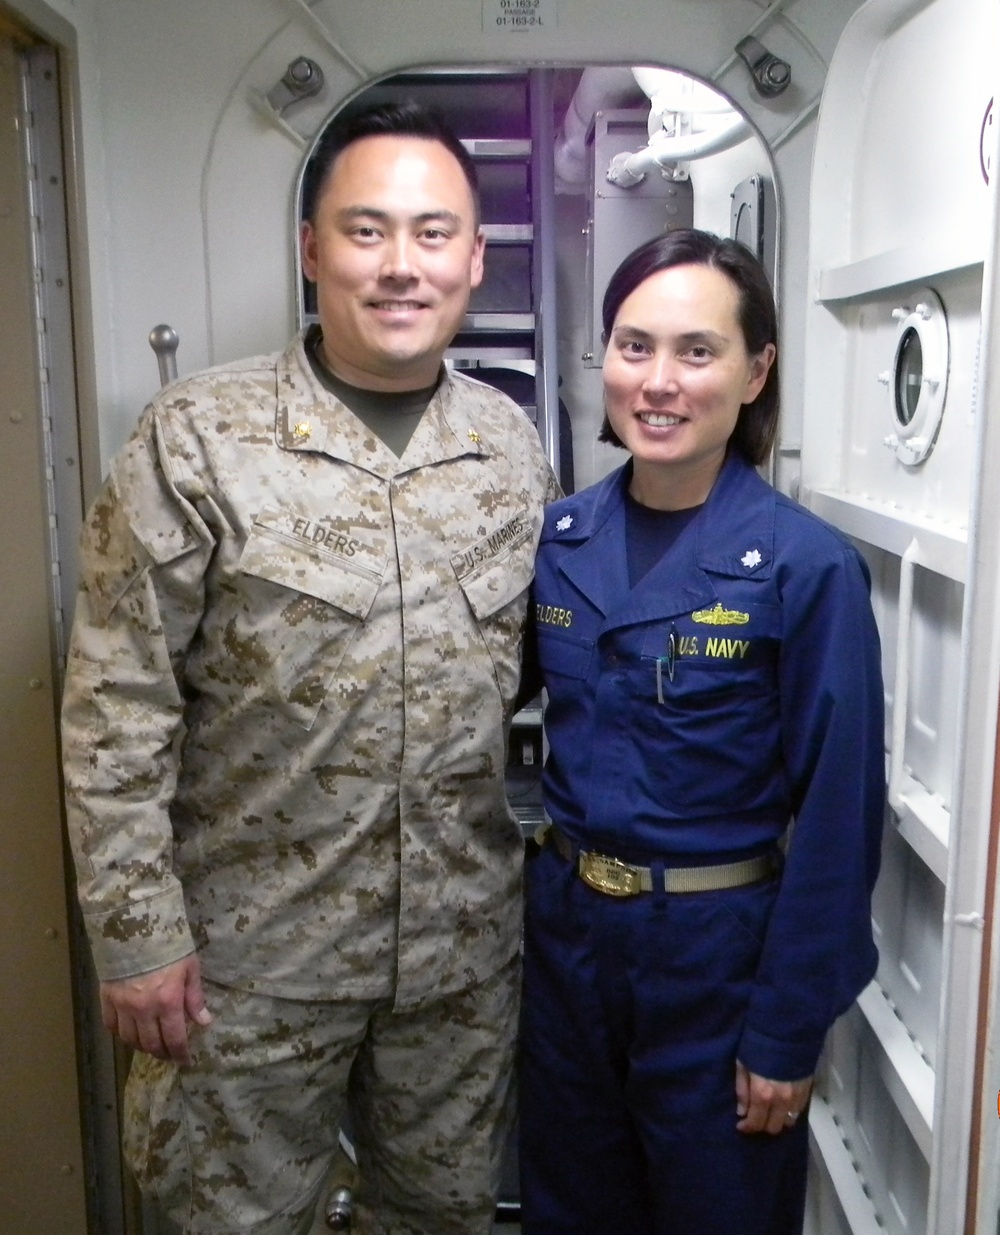 Marine brother and Sailor sister link up while deployed at sea